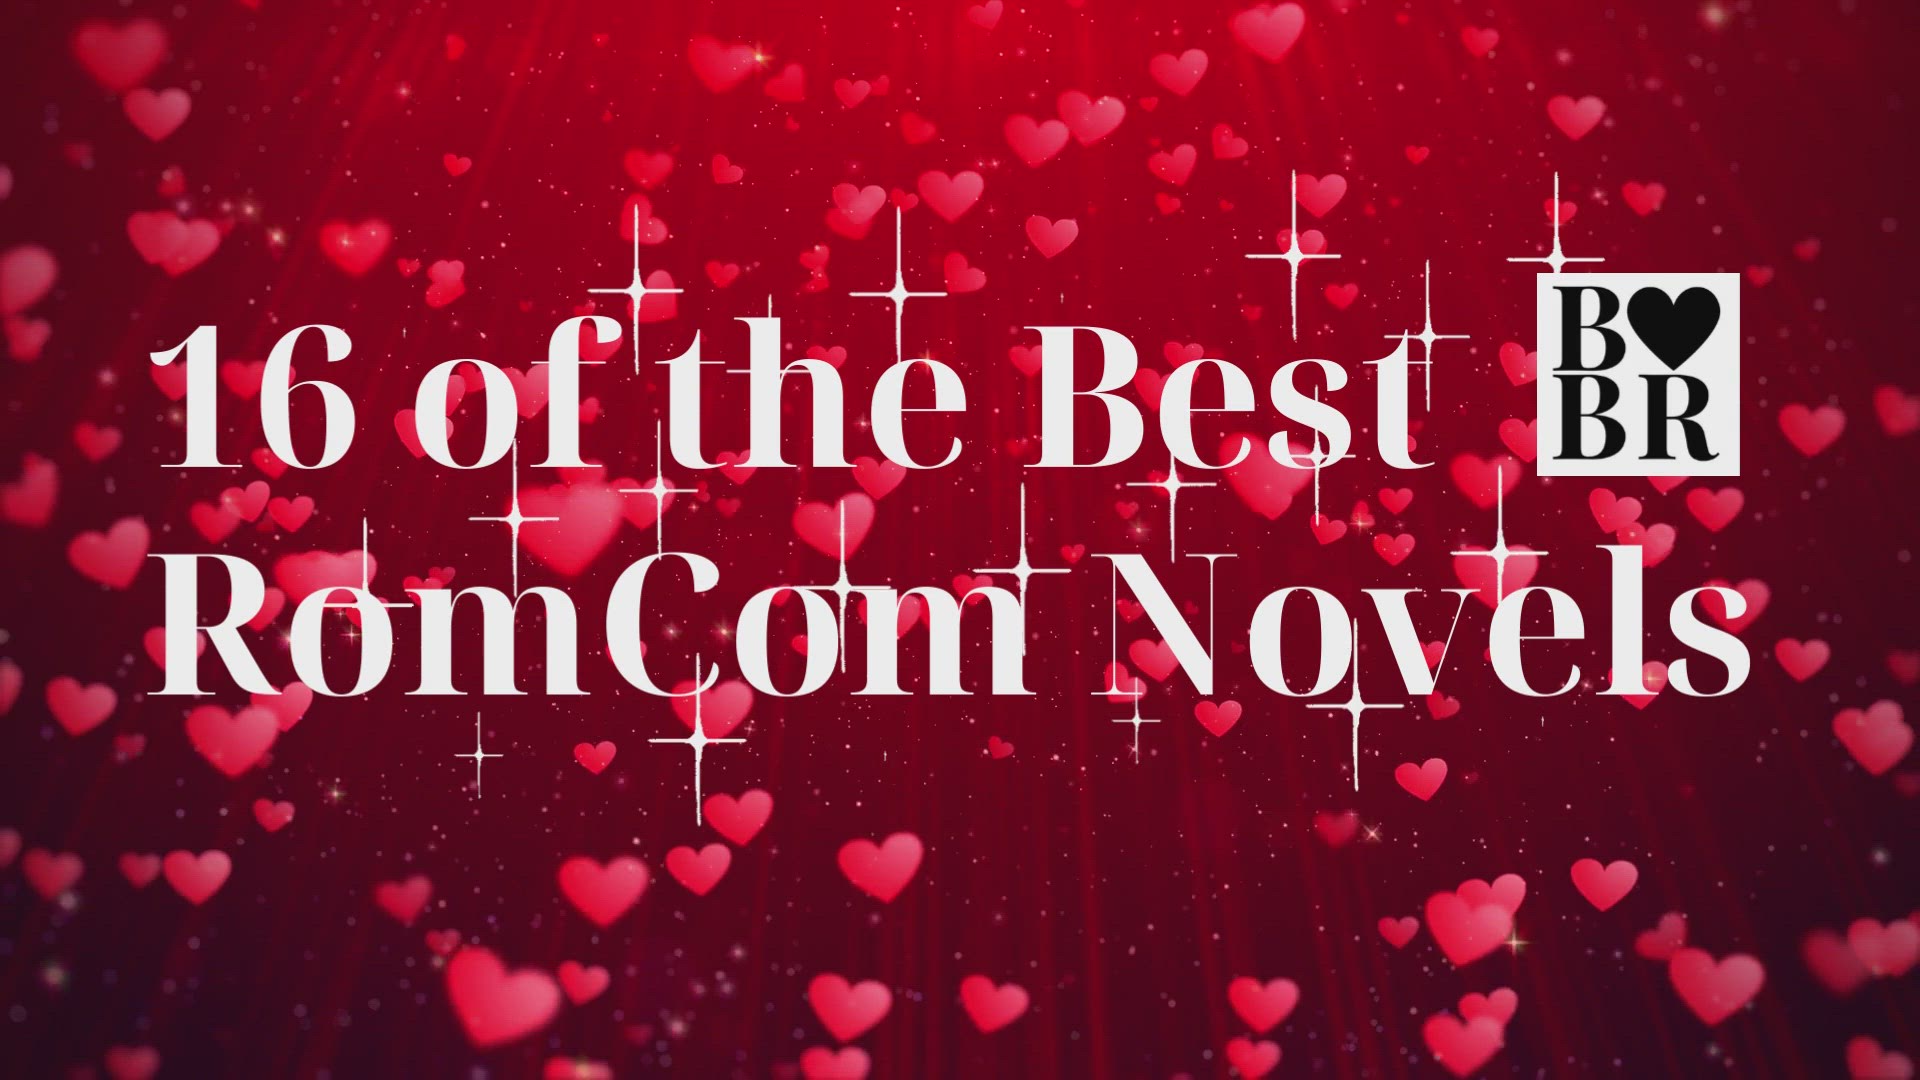 Feelin' the Love: A Look at Romantic Songs, Books and Comedies